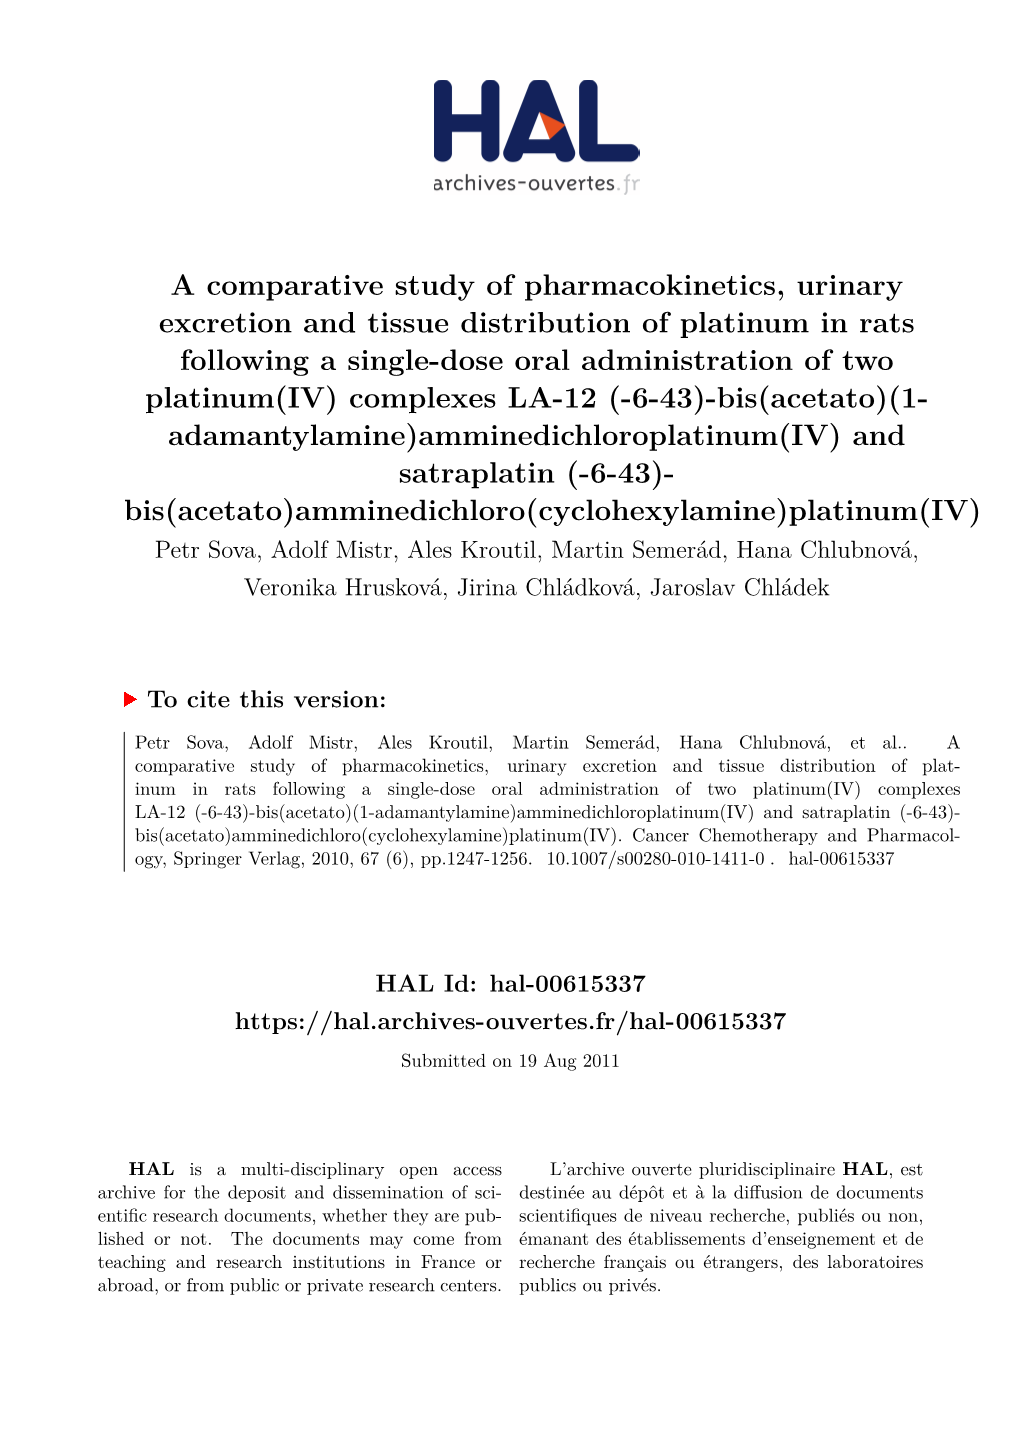 A Comparative Study of Pharmacokinetics, Urinary Excretion